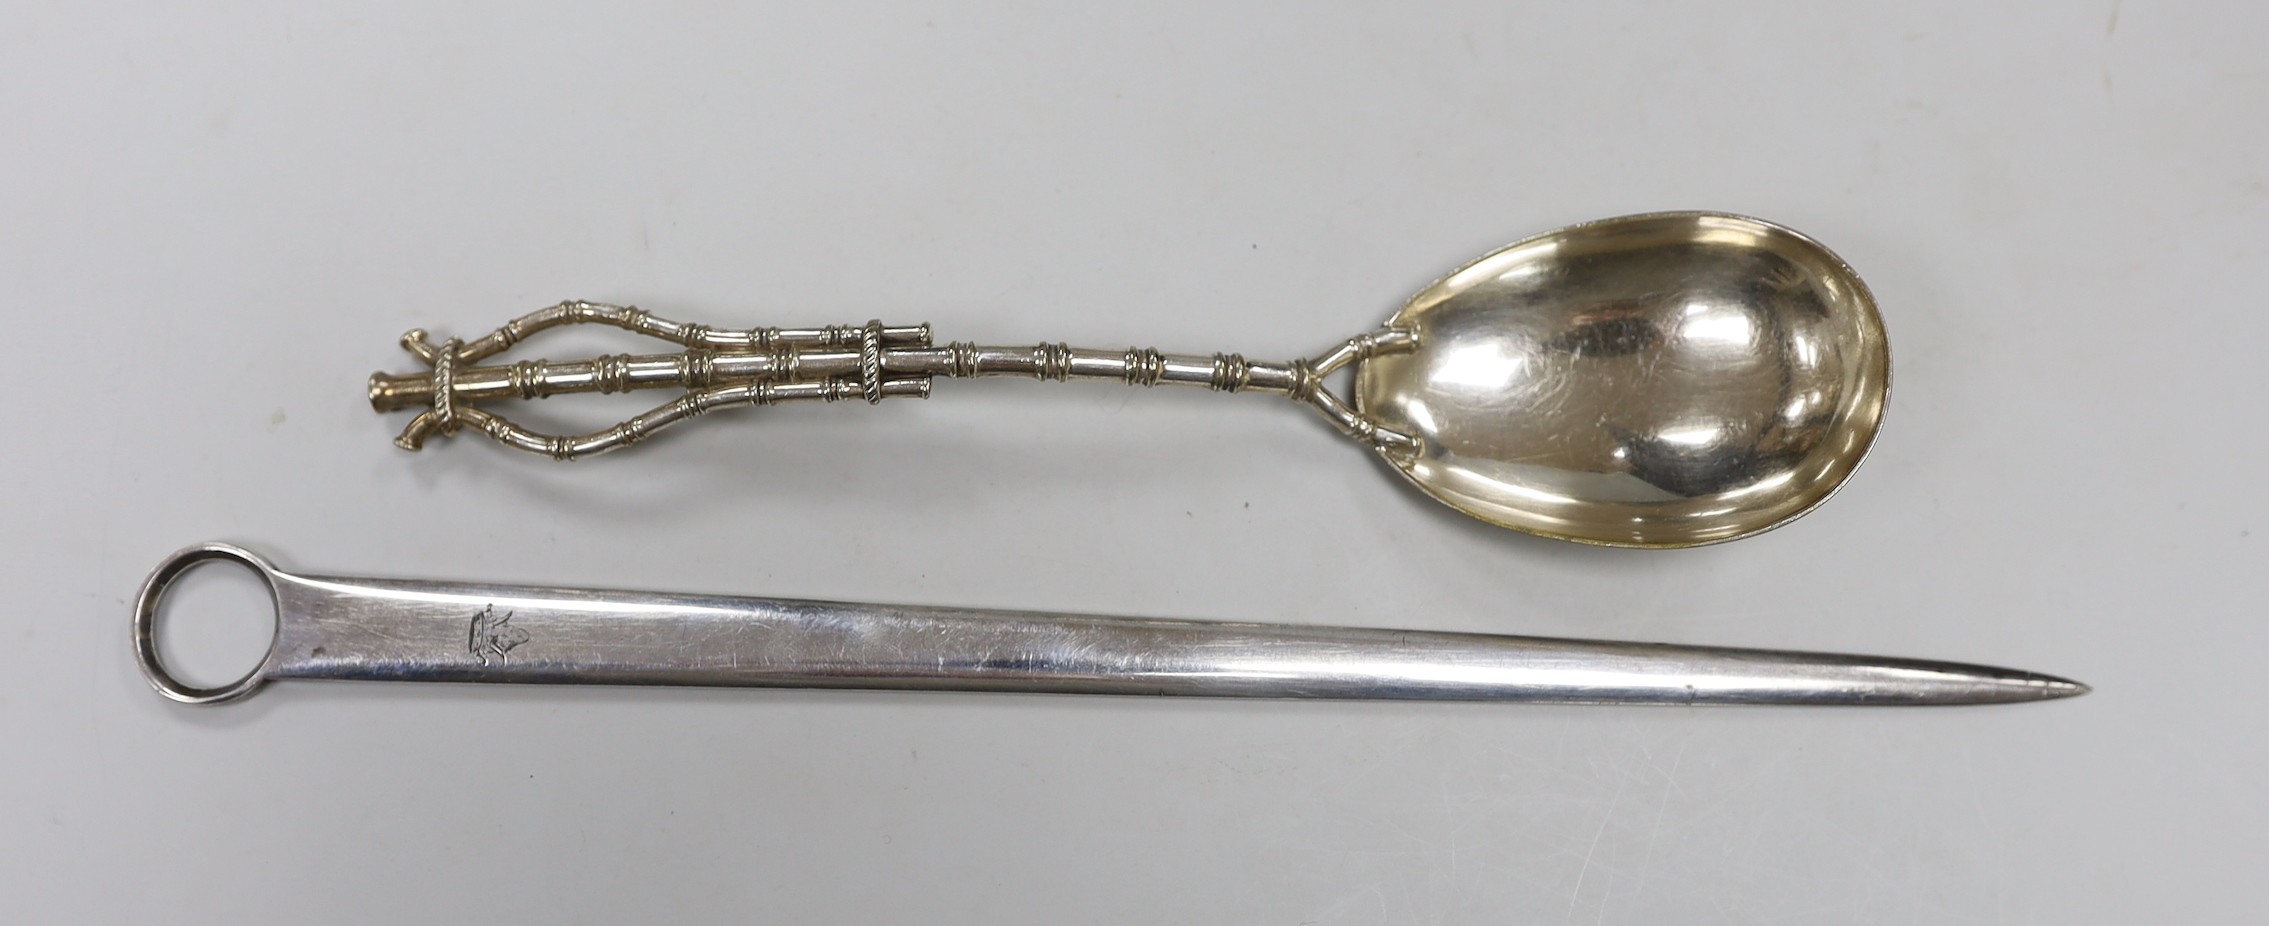 Coronation and Royal ephemera, together with a plated meat skewer and faux bamboo handled fruit spoon                                                                                                                       